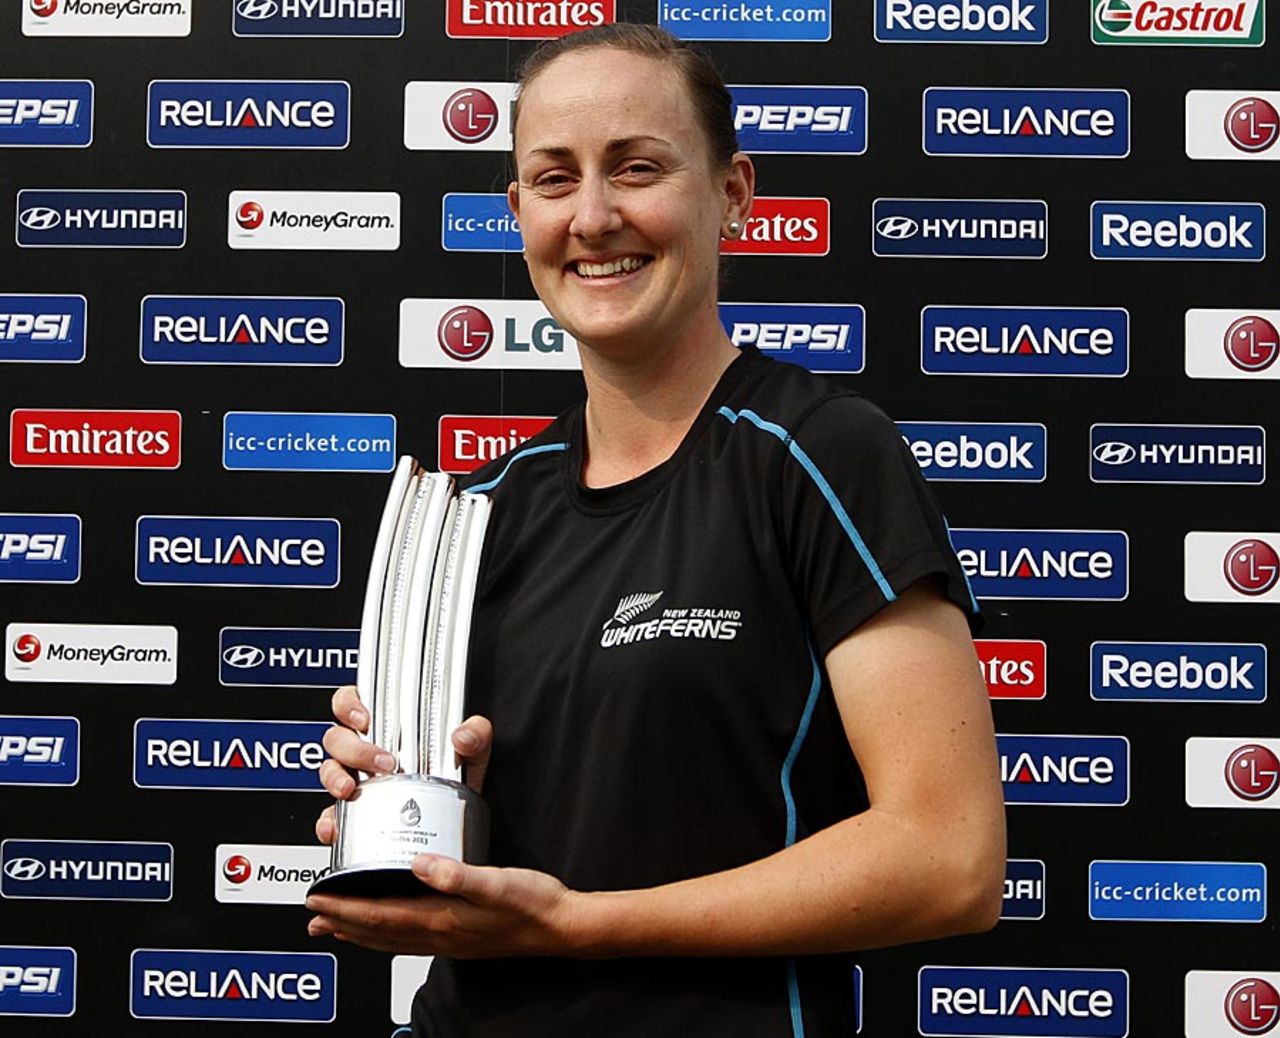 Rachel Candy took 5 for 19 off ten overs to help defeat Pakistan, New Zealand v Pakistan, Women's World Cup, Group B, Cuttack, February 3, 2013